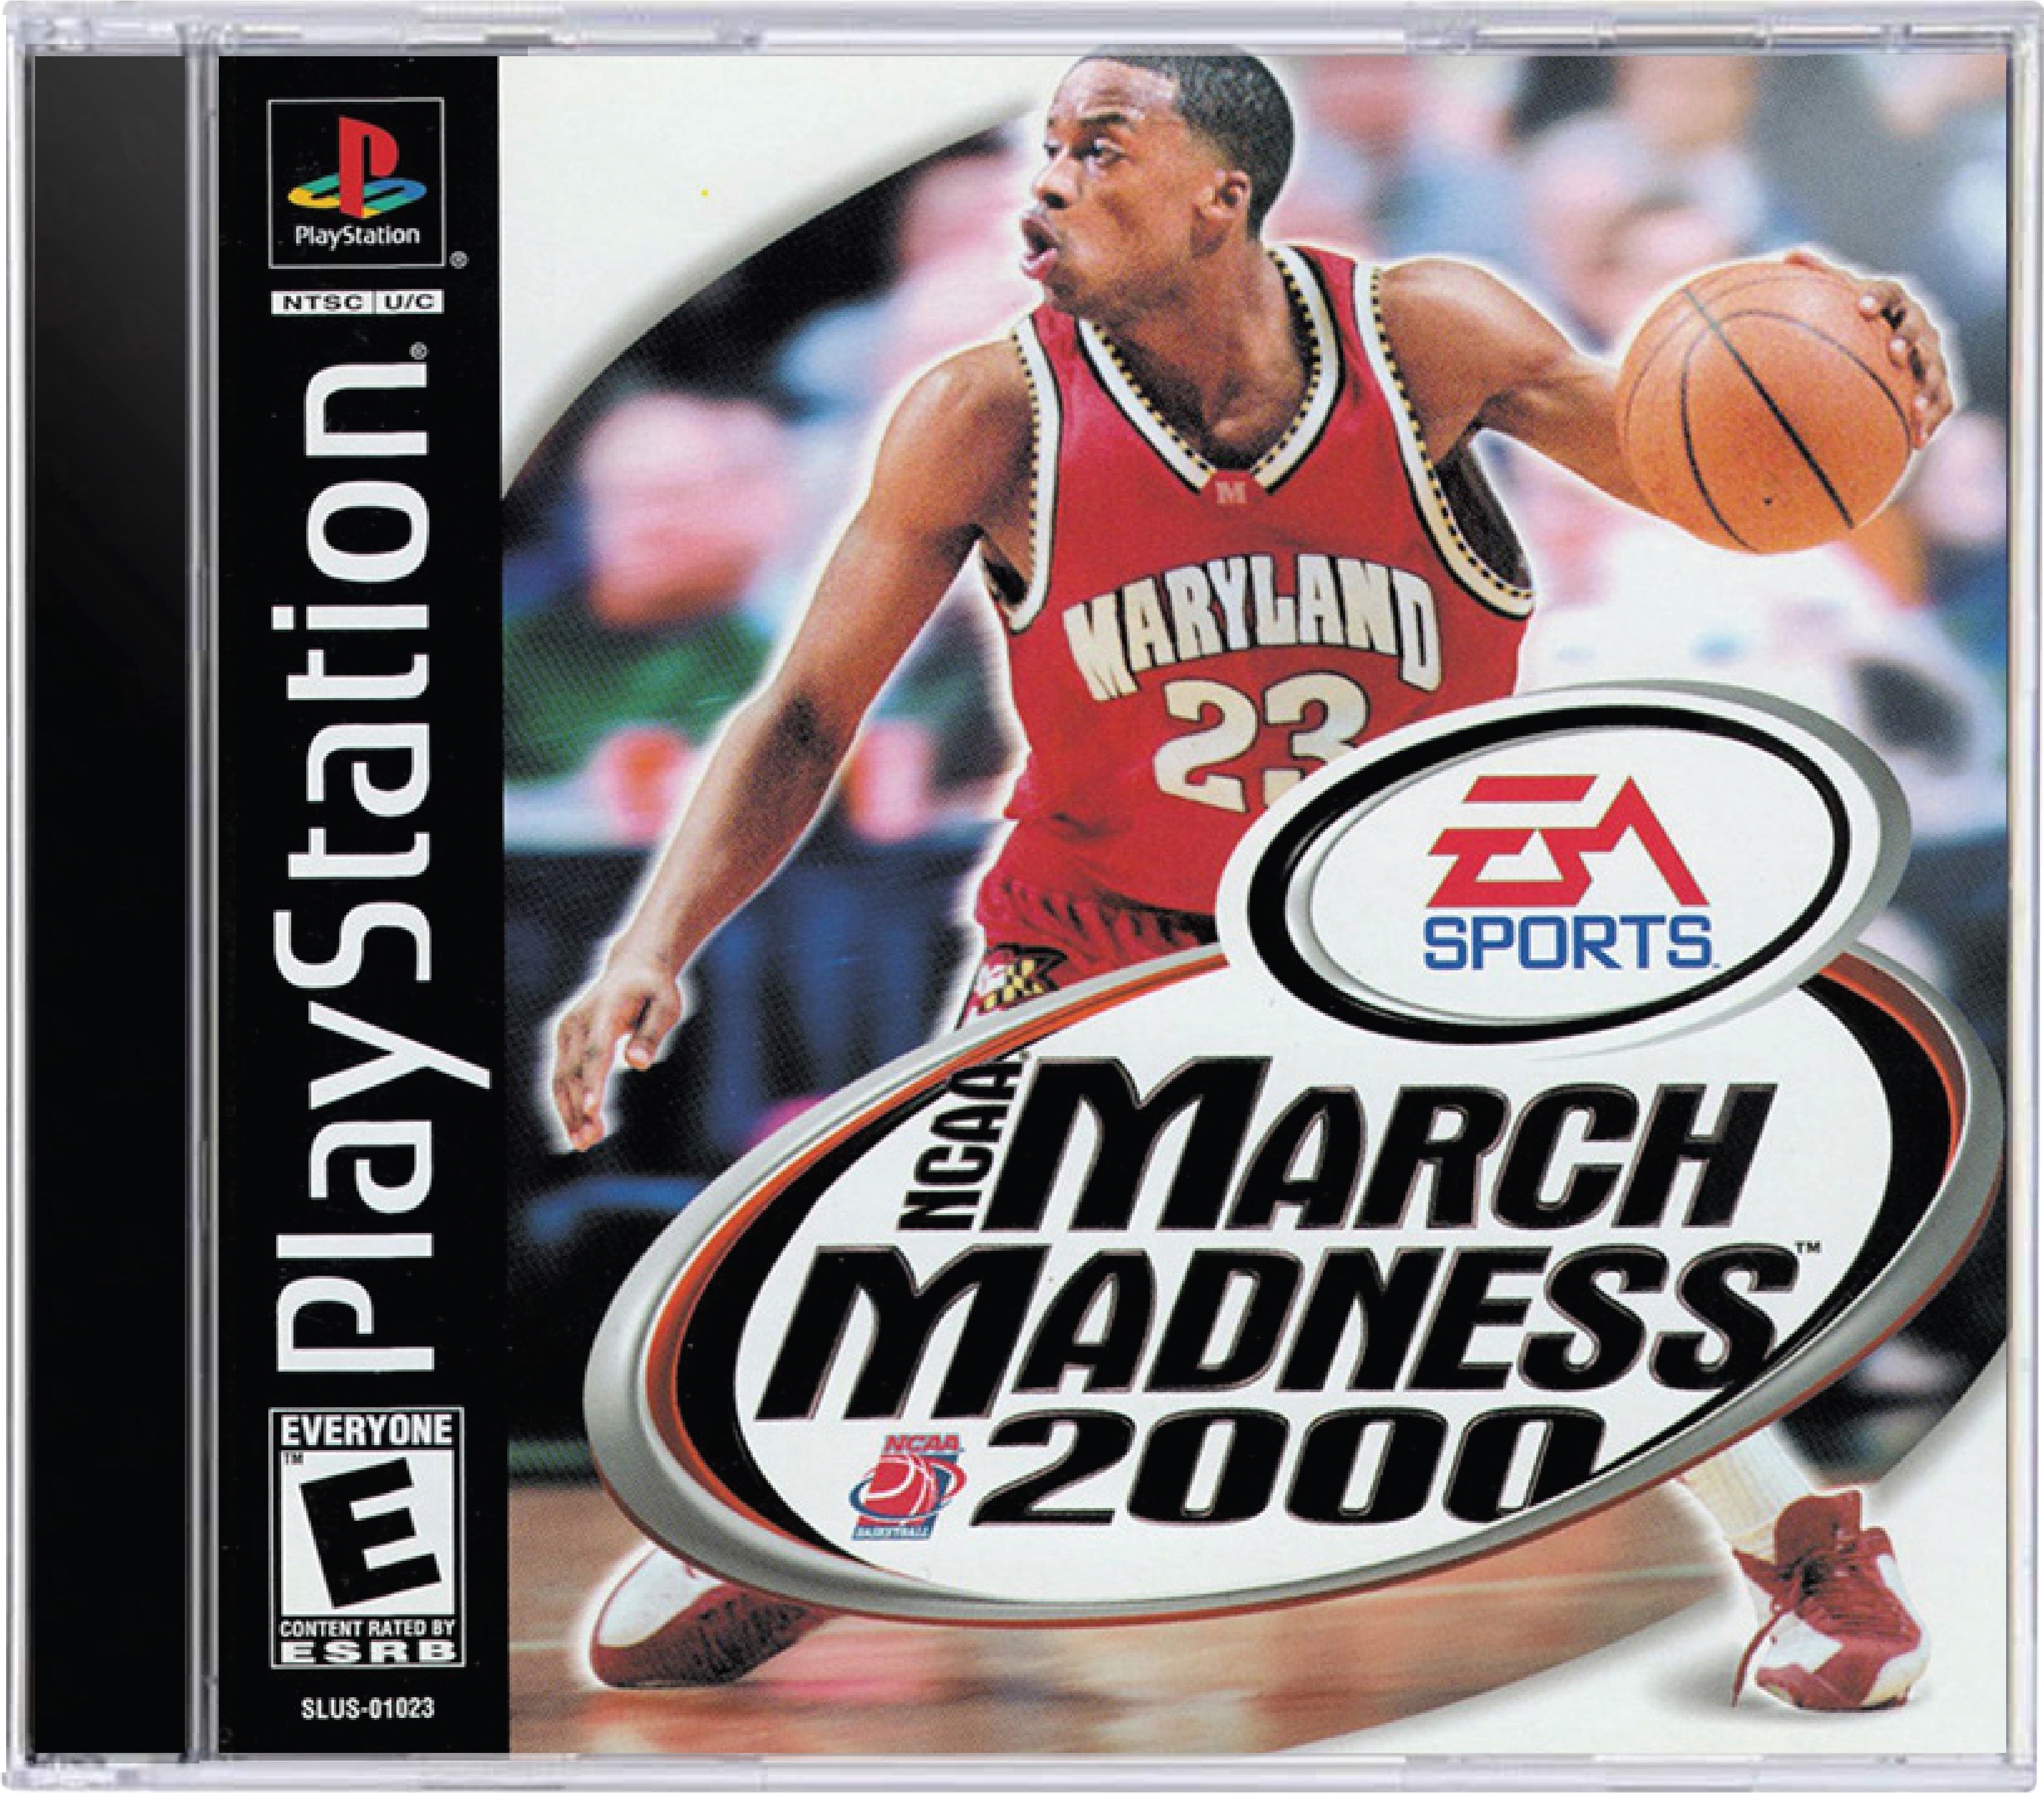 NCAA March Madness 2000 Cover Art and Product Photo